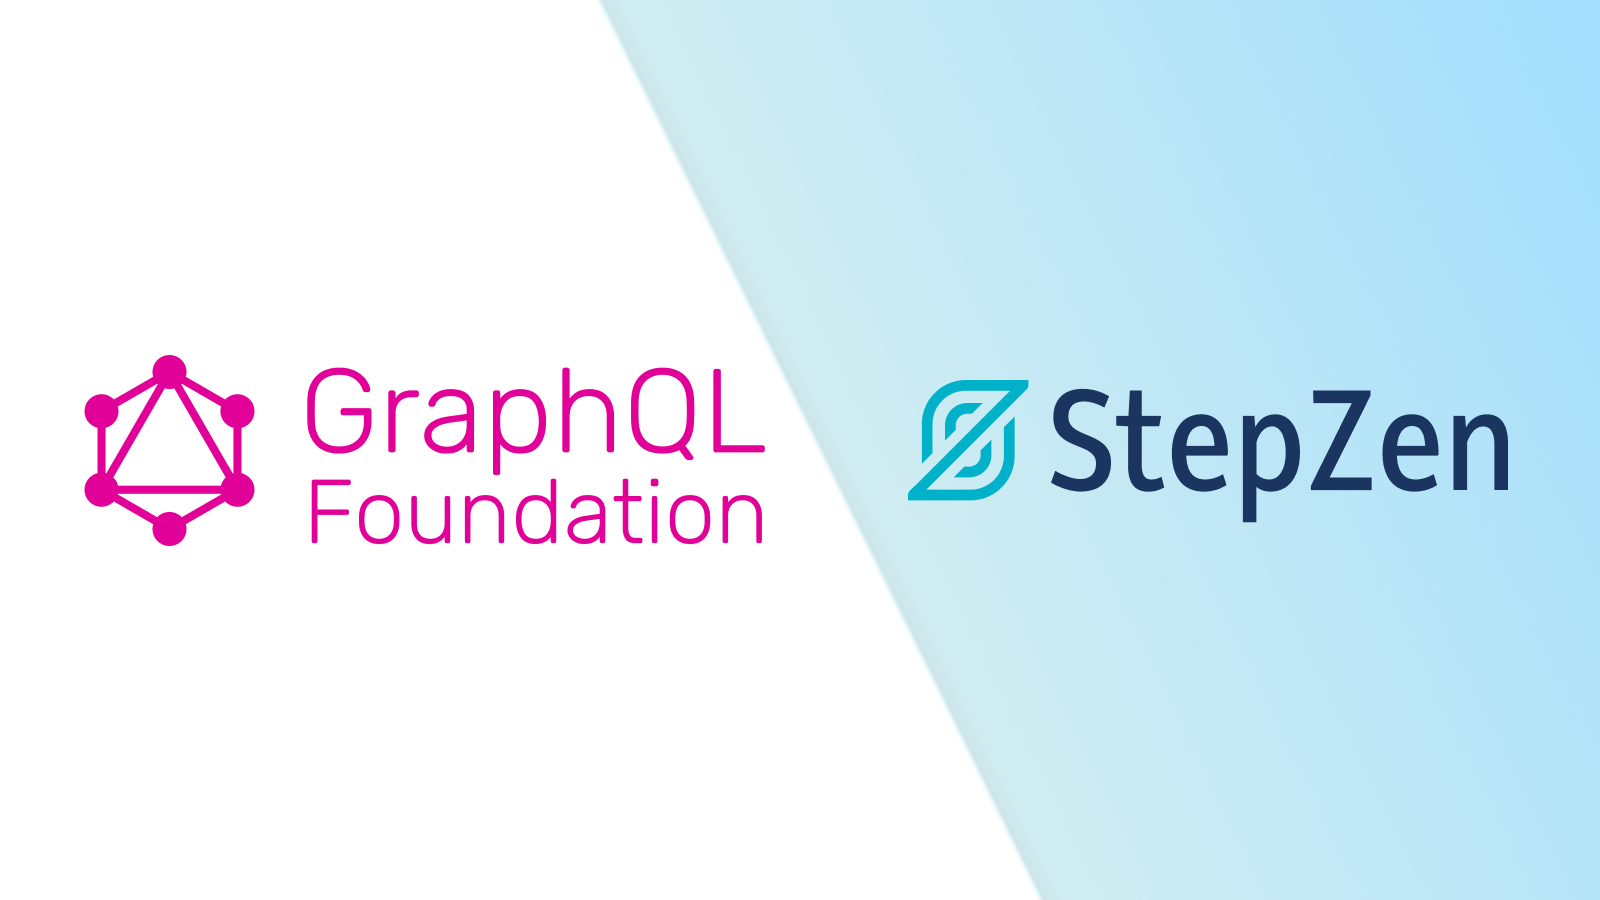 StepZen is Now Part of The GraphQL Foundation